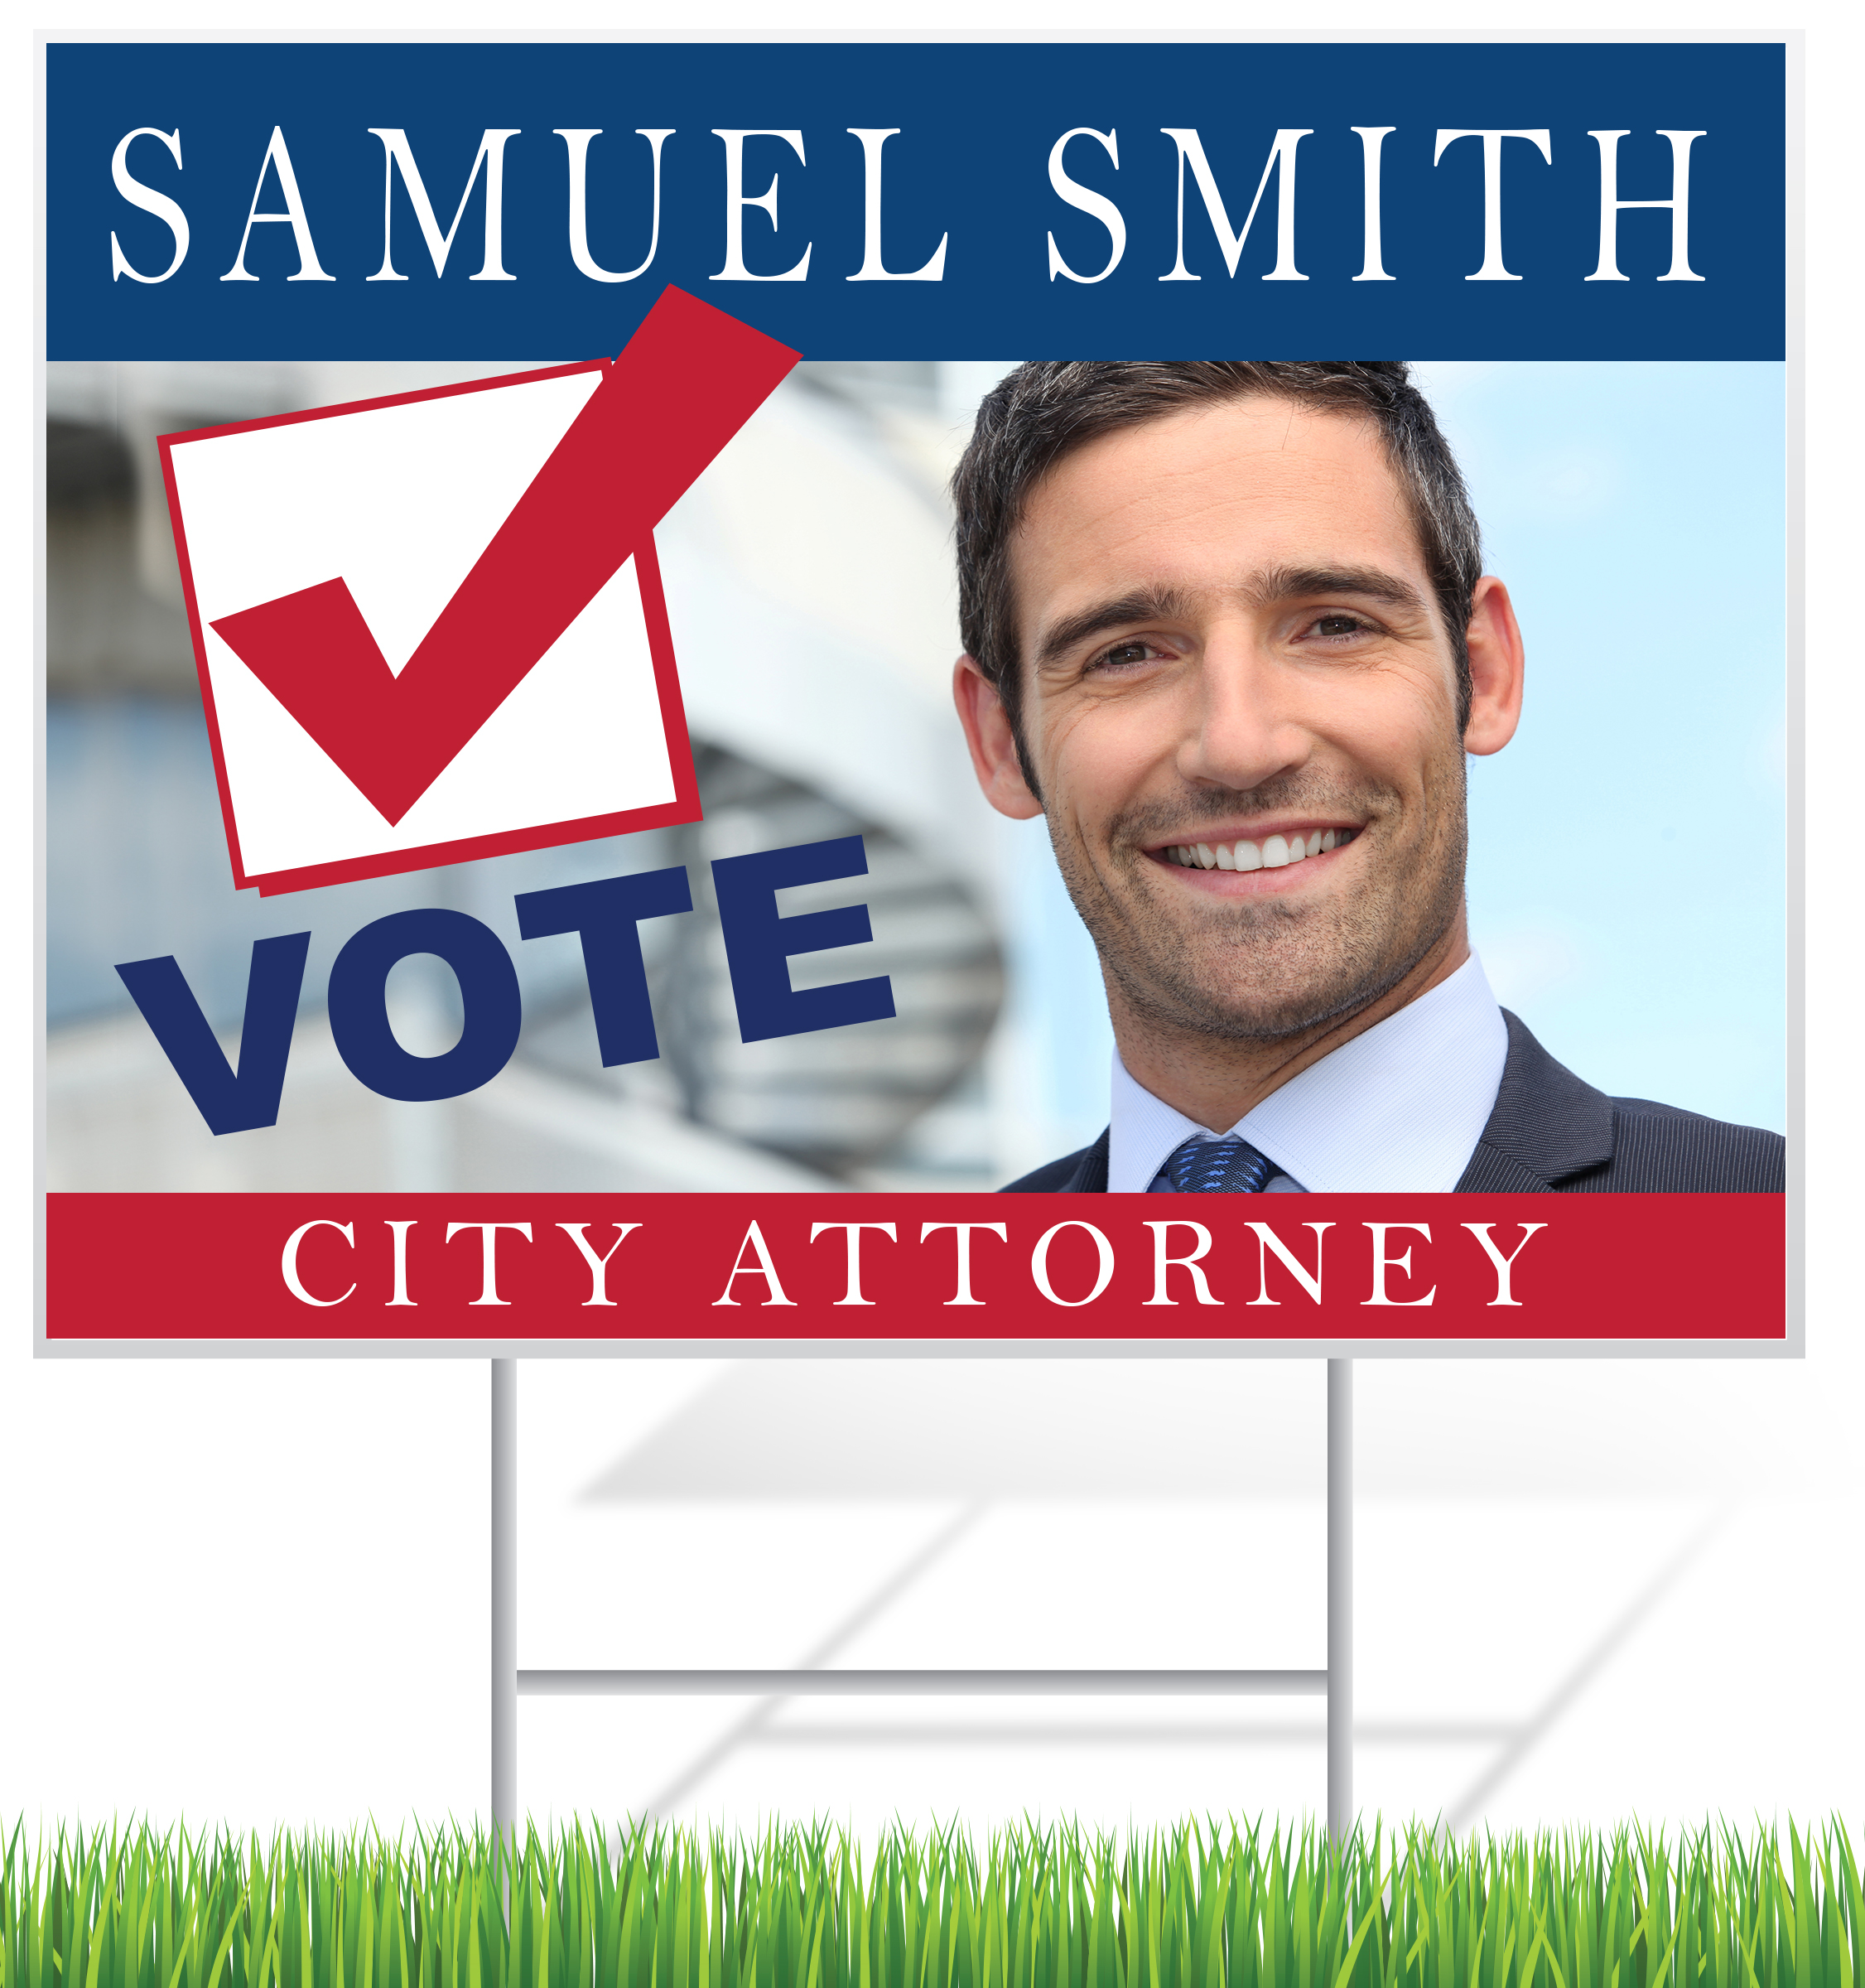 Election Lawn Sign Example | LawnSigns.com